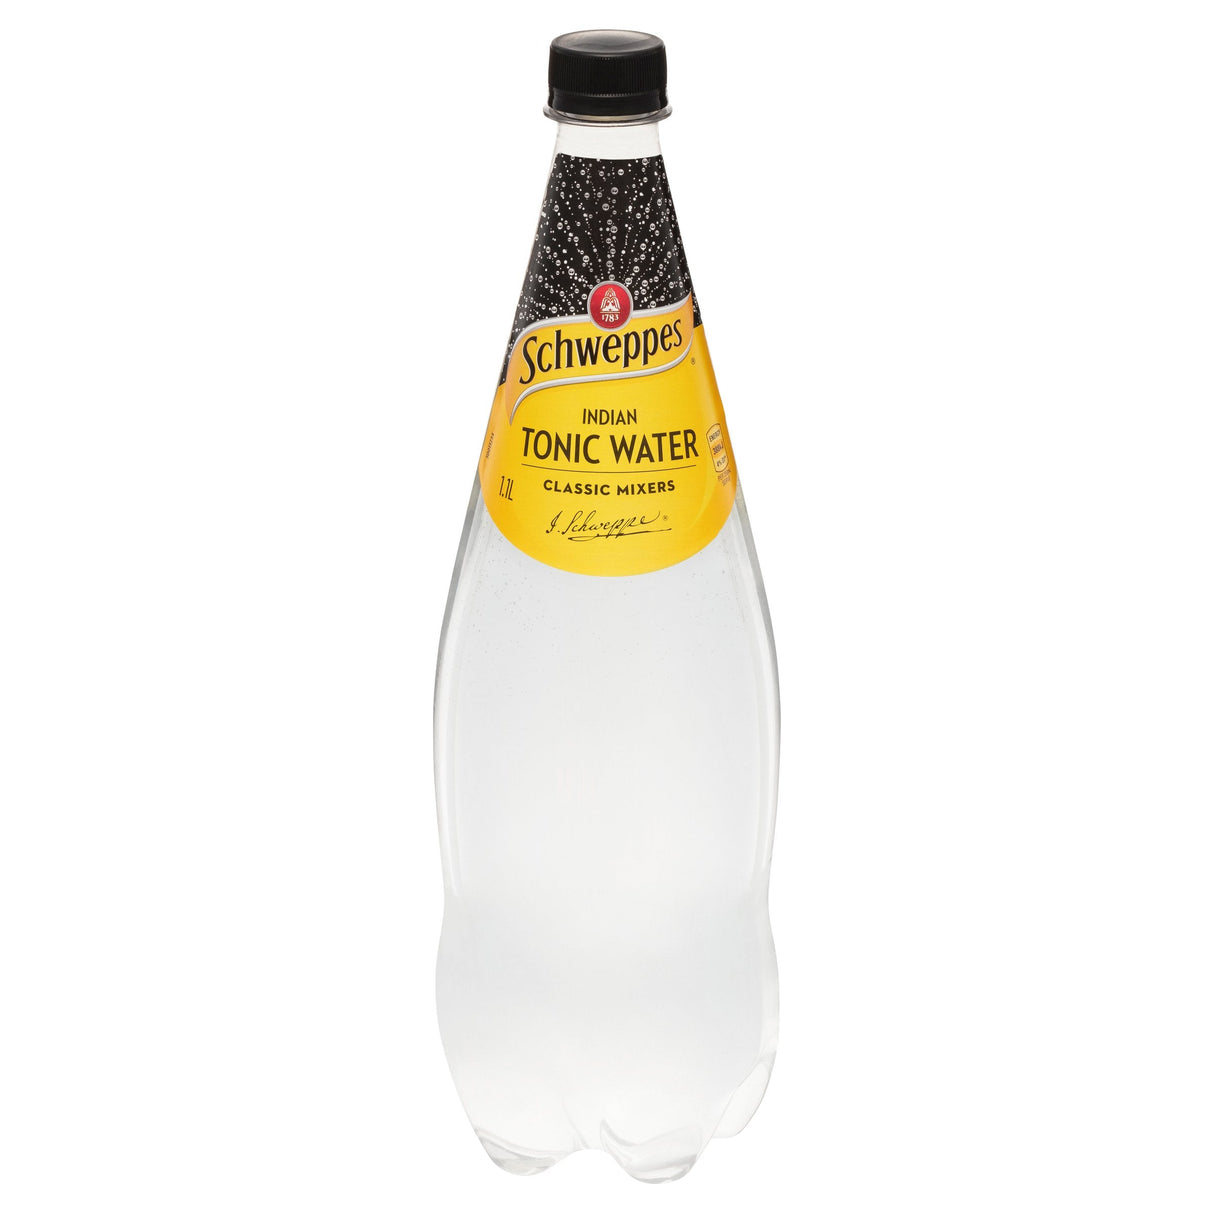 Schweppes Indian Tonic Water Bottle 1.1l